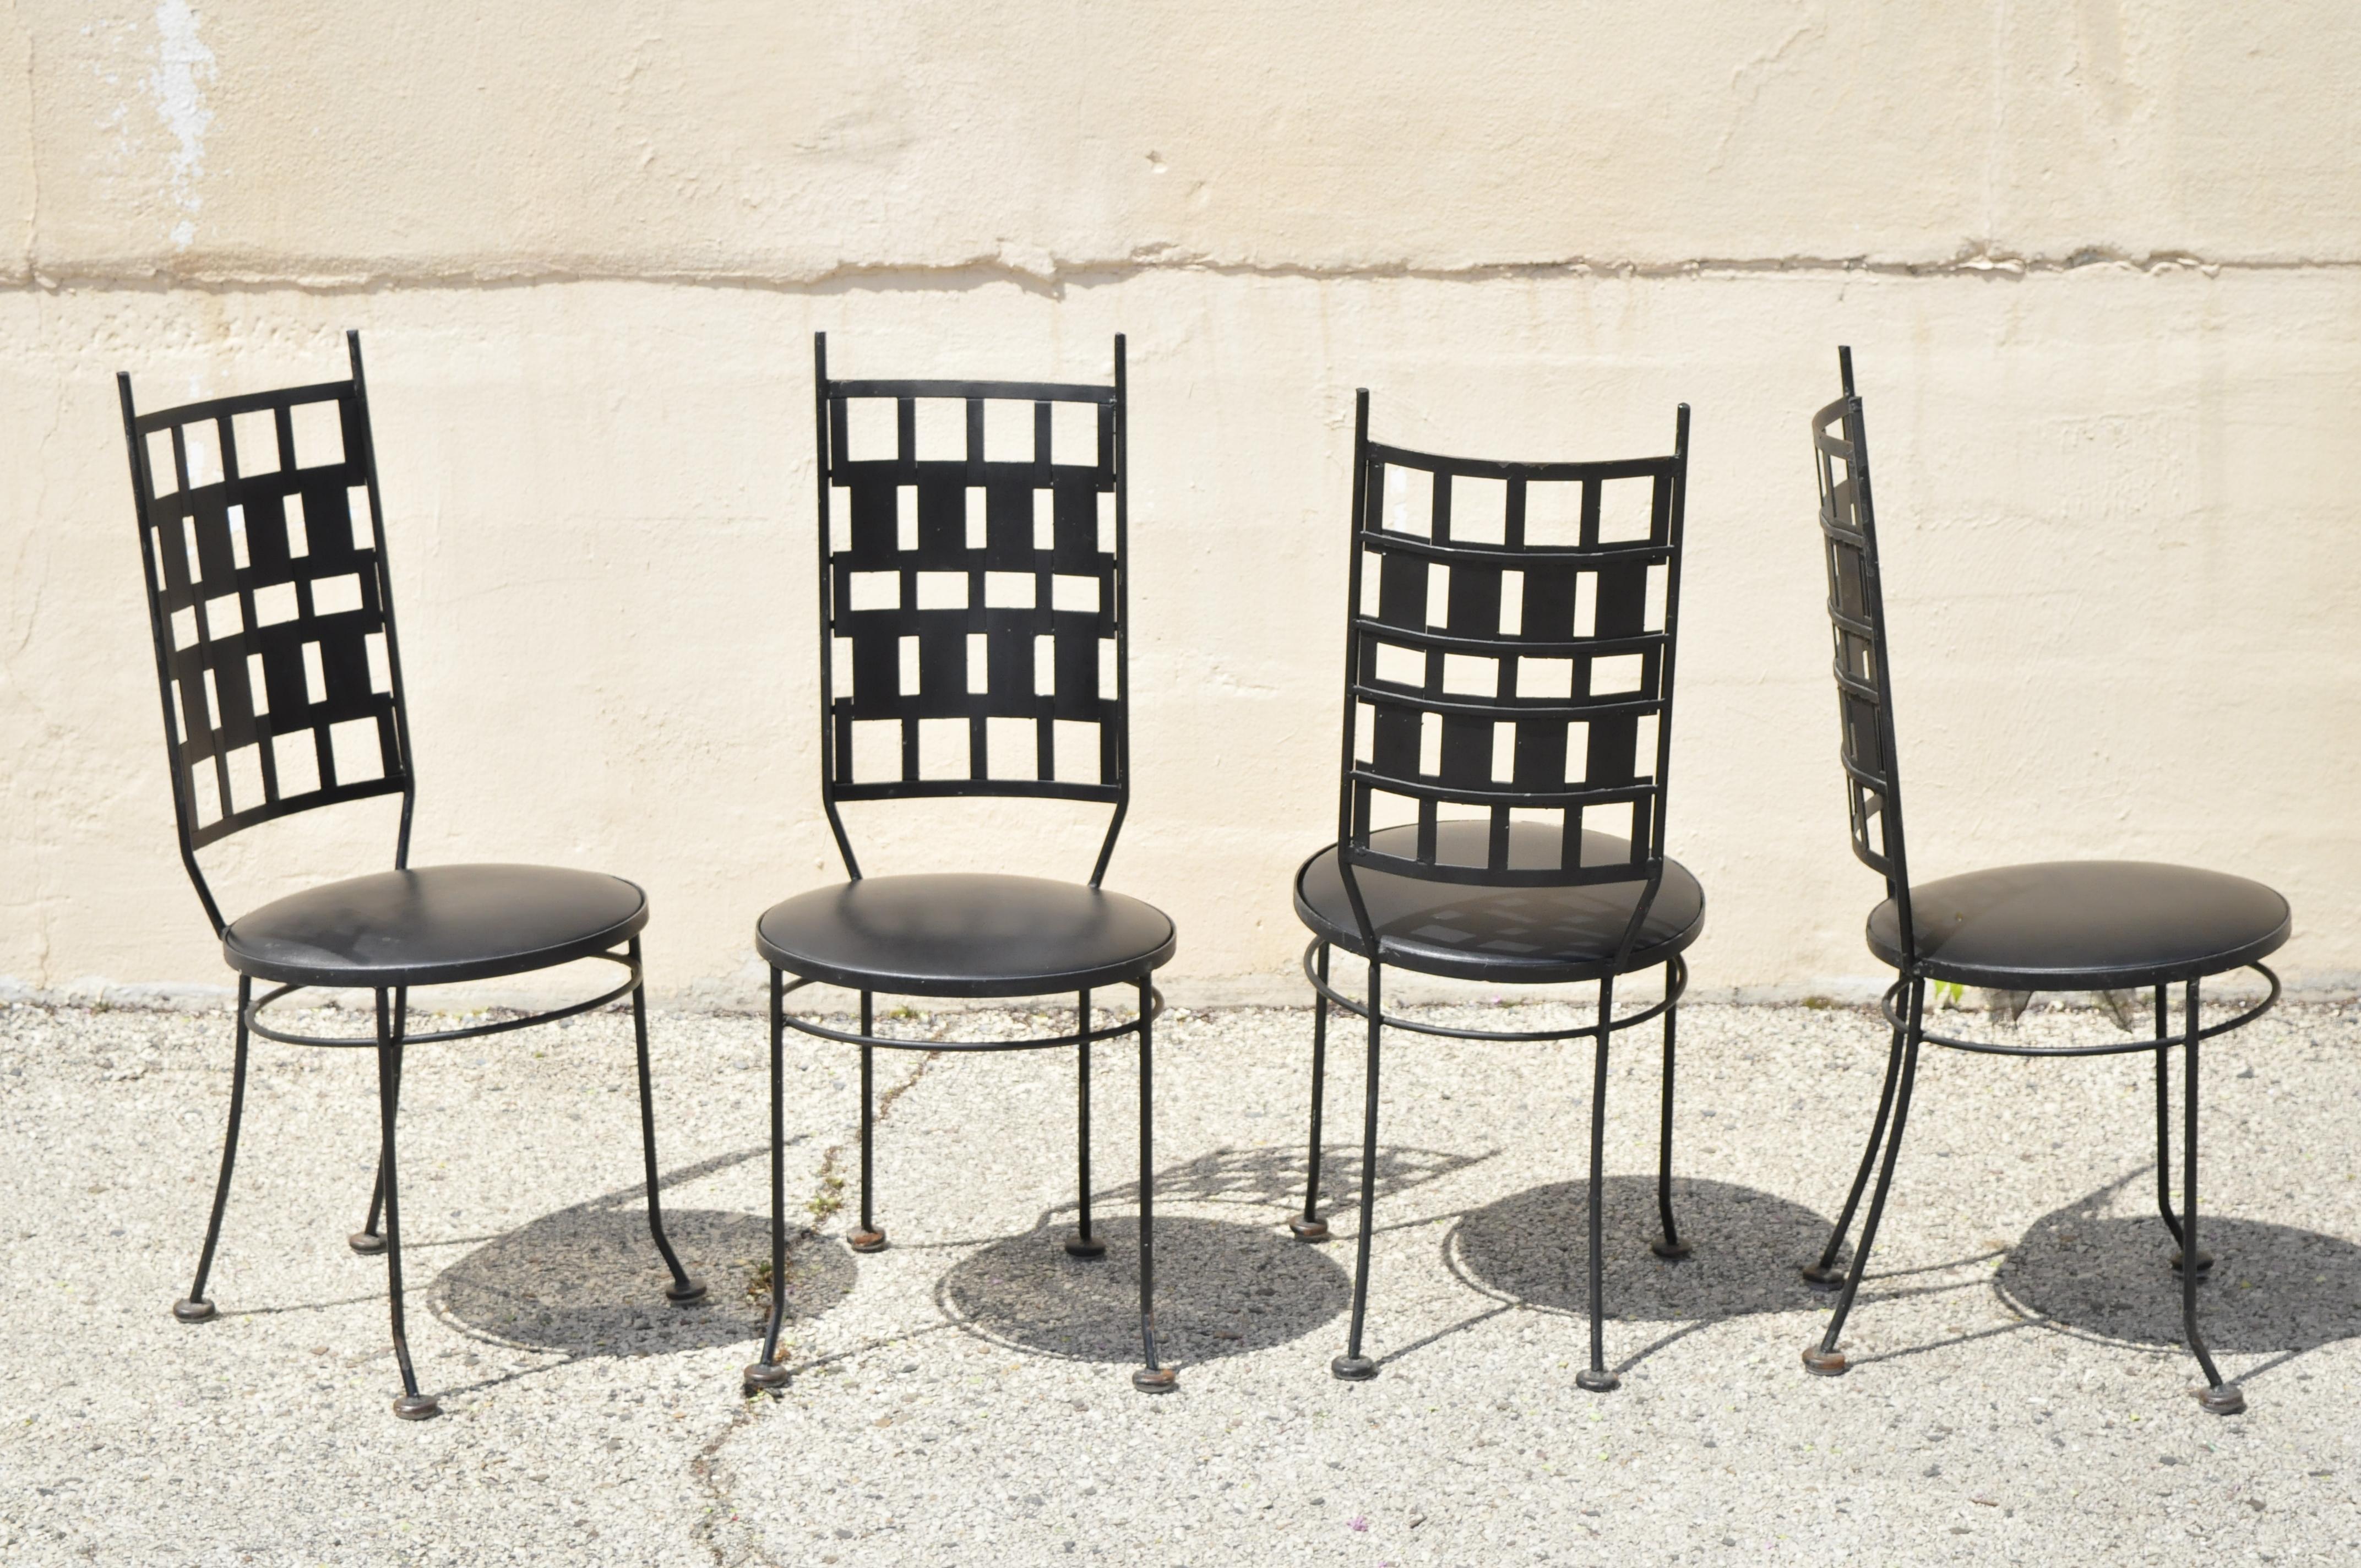 Vintage wrought iron atomic era Italian style Mid-Century Modern dining chairs - set of 4. Item features round naugahyde upholstered seats, wrought iron construction, very nice vintage set, clean modernist lines, great style and form, Circa mid 20th